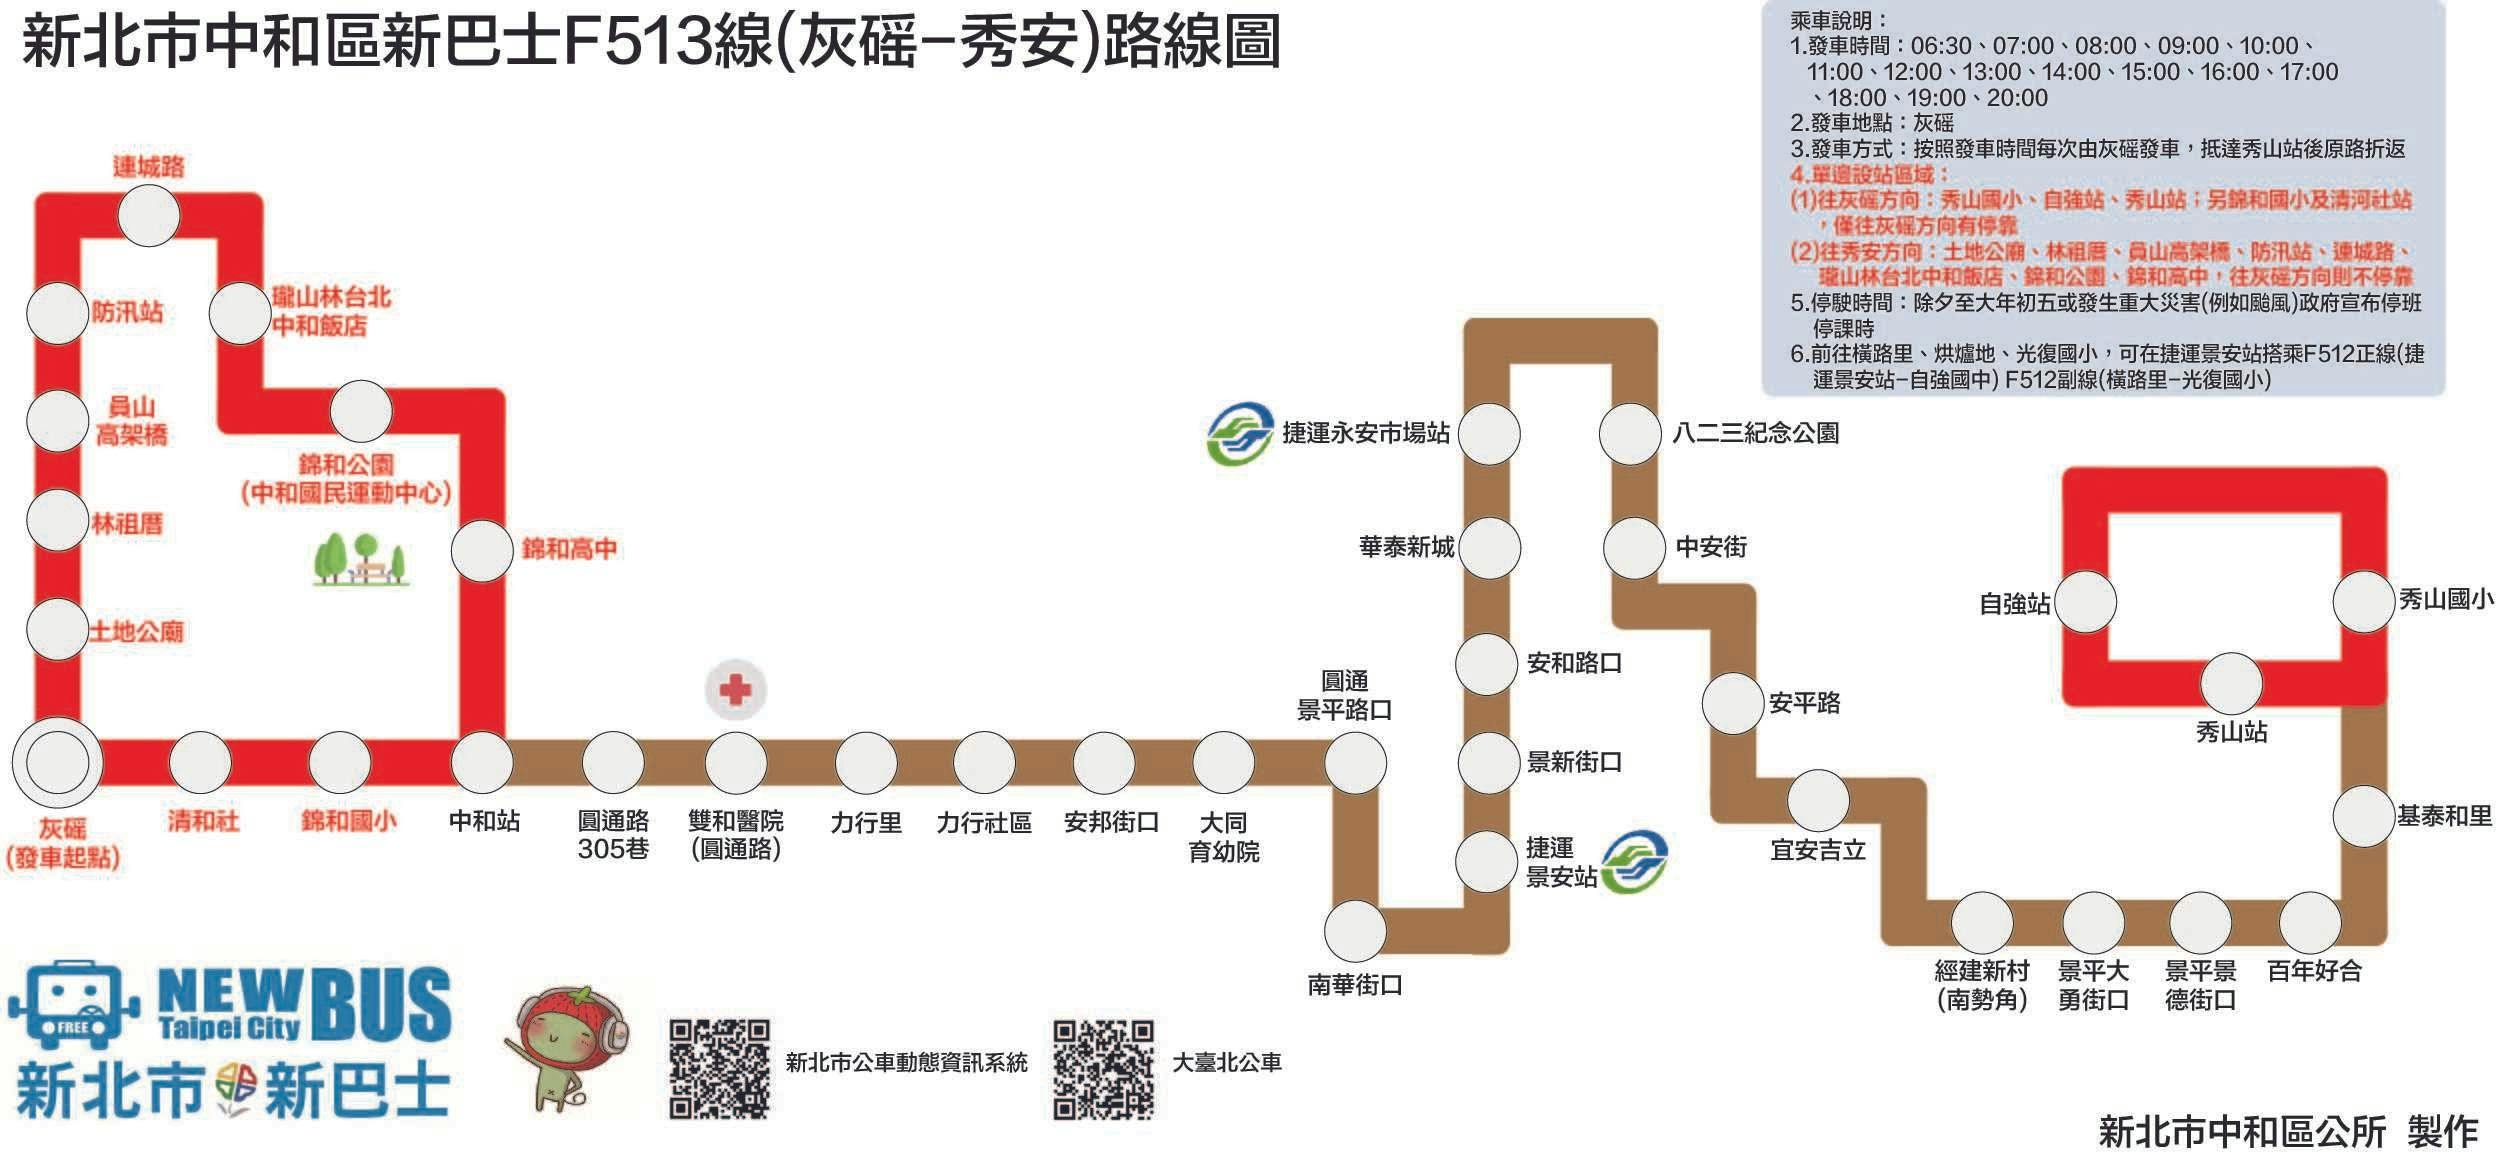 F513Route Map-新北市 Bus